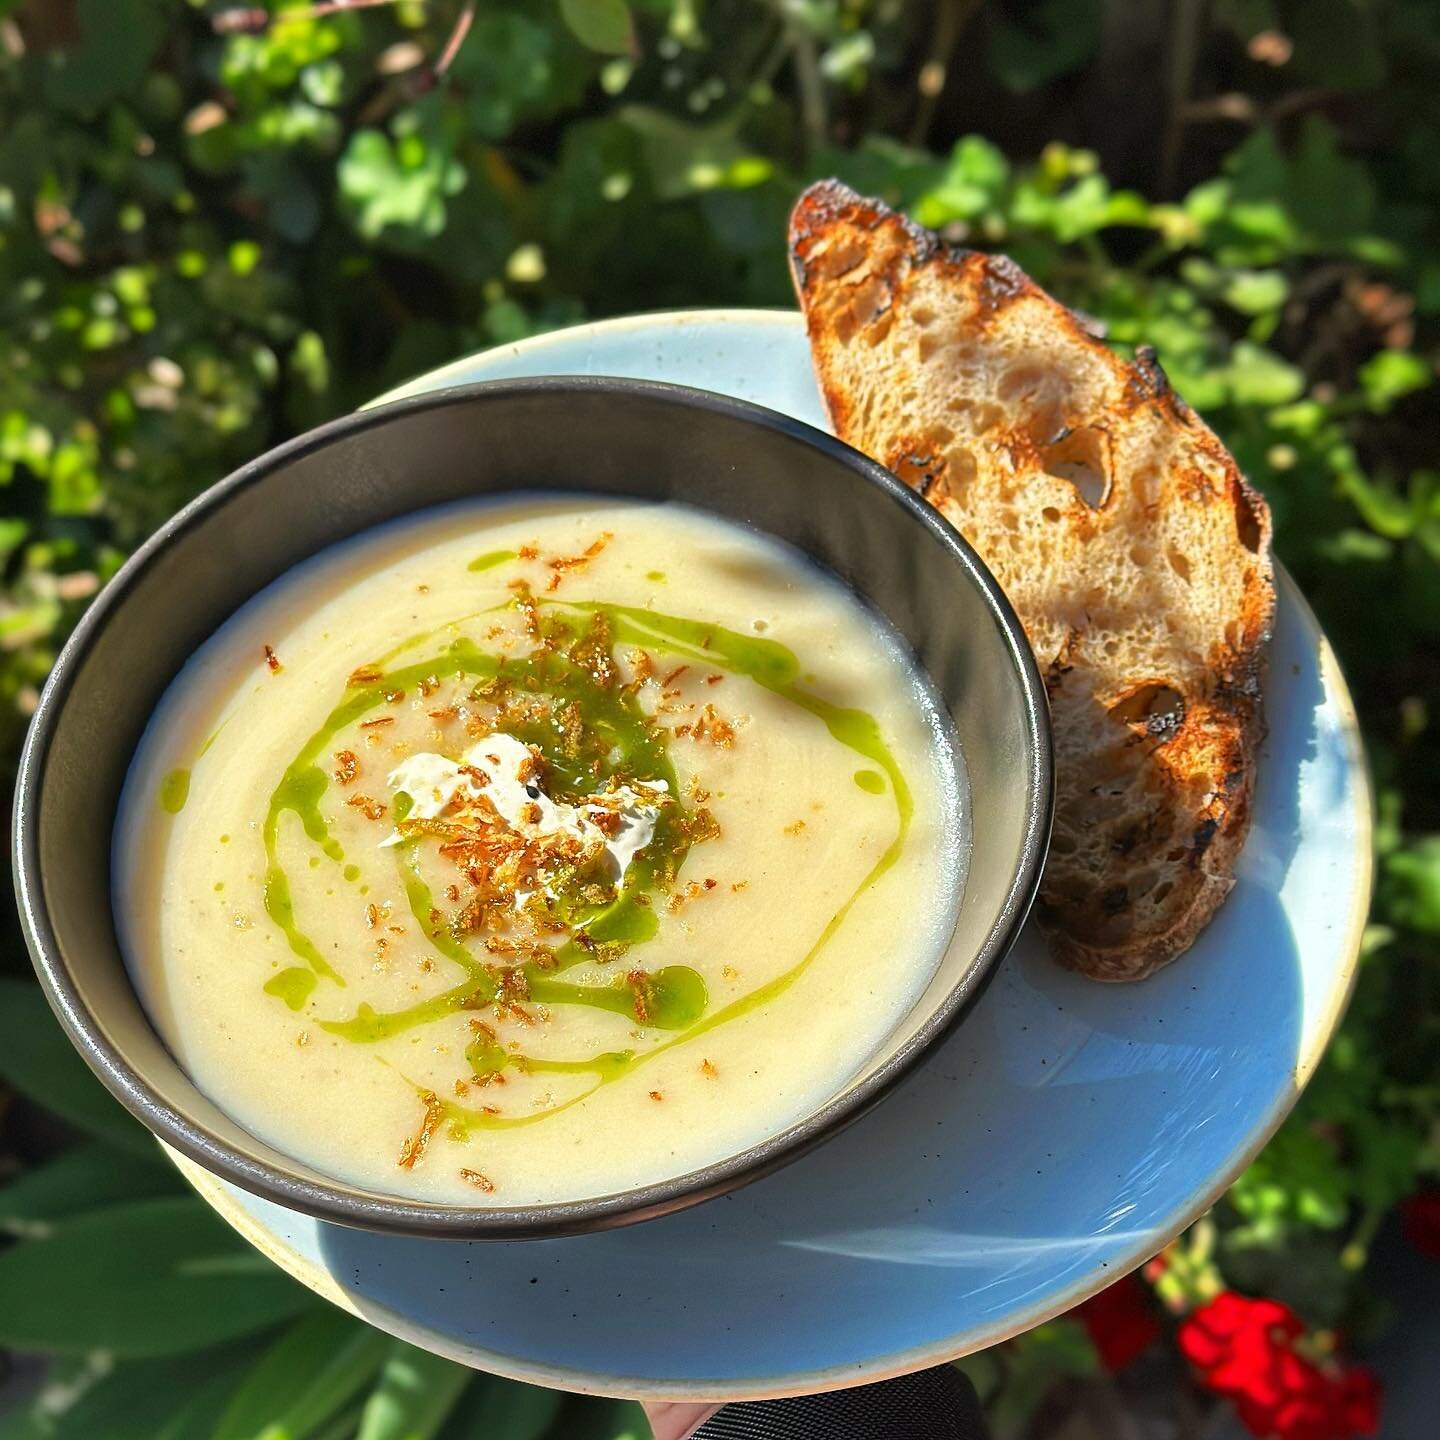 Cauliflower Soup 🥣 
served w/ a side of toasted @honorbread sourdough 

Get it to dine in or takeaway! #ohyeh 

#mossycafe #seeyouatthemossy #eurobodalla #southcoastnsw #batemansbay #nsw #wheretoeat #whattoeat #visitbatemansbay #visitmoruya #visitns